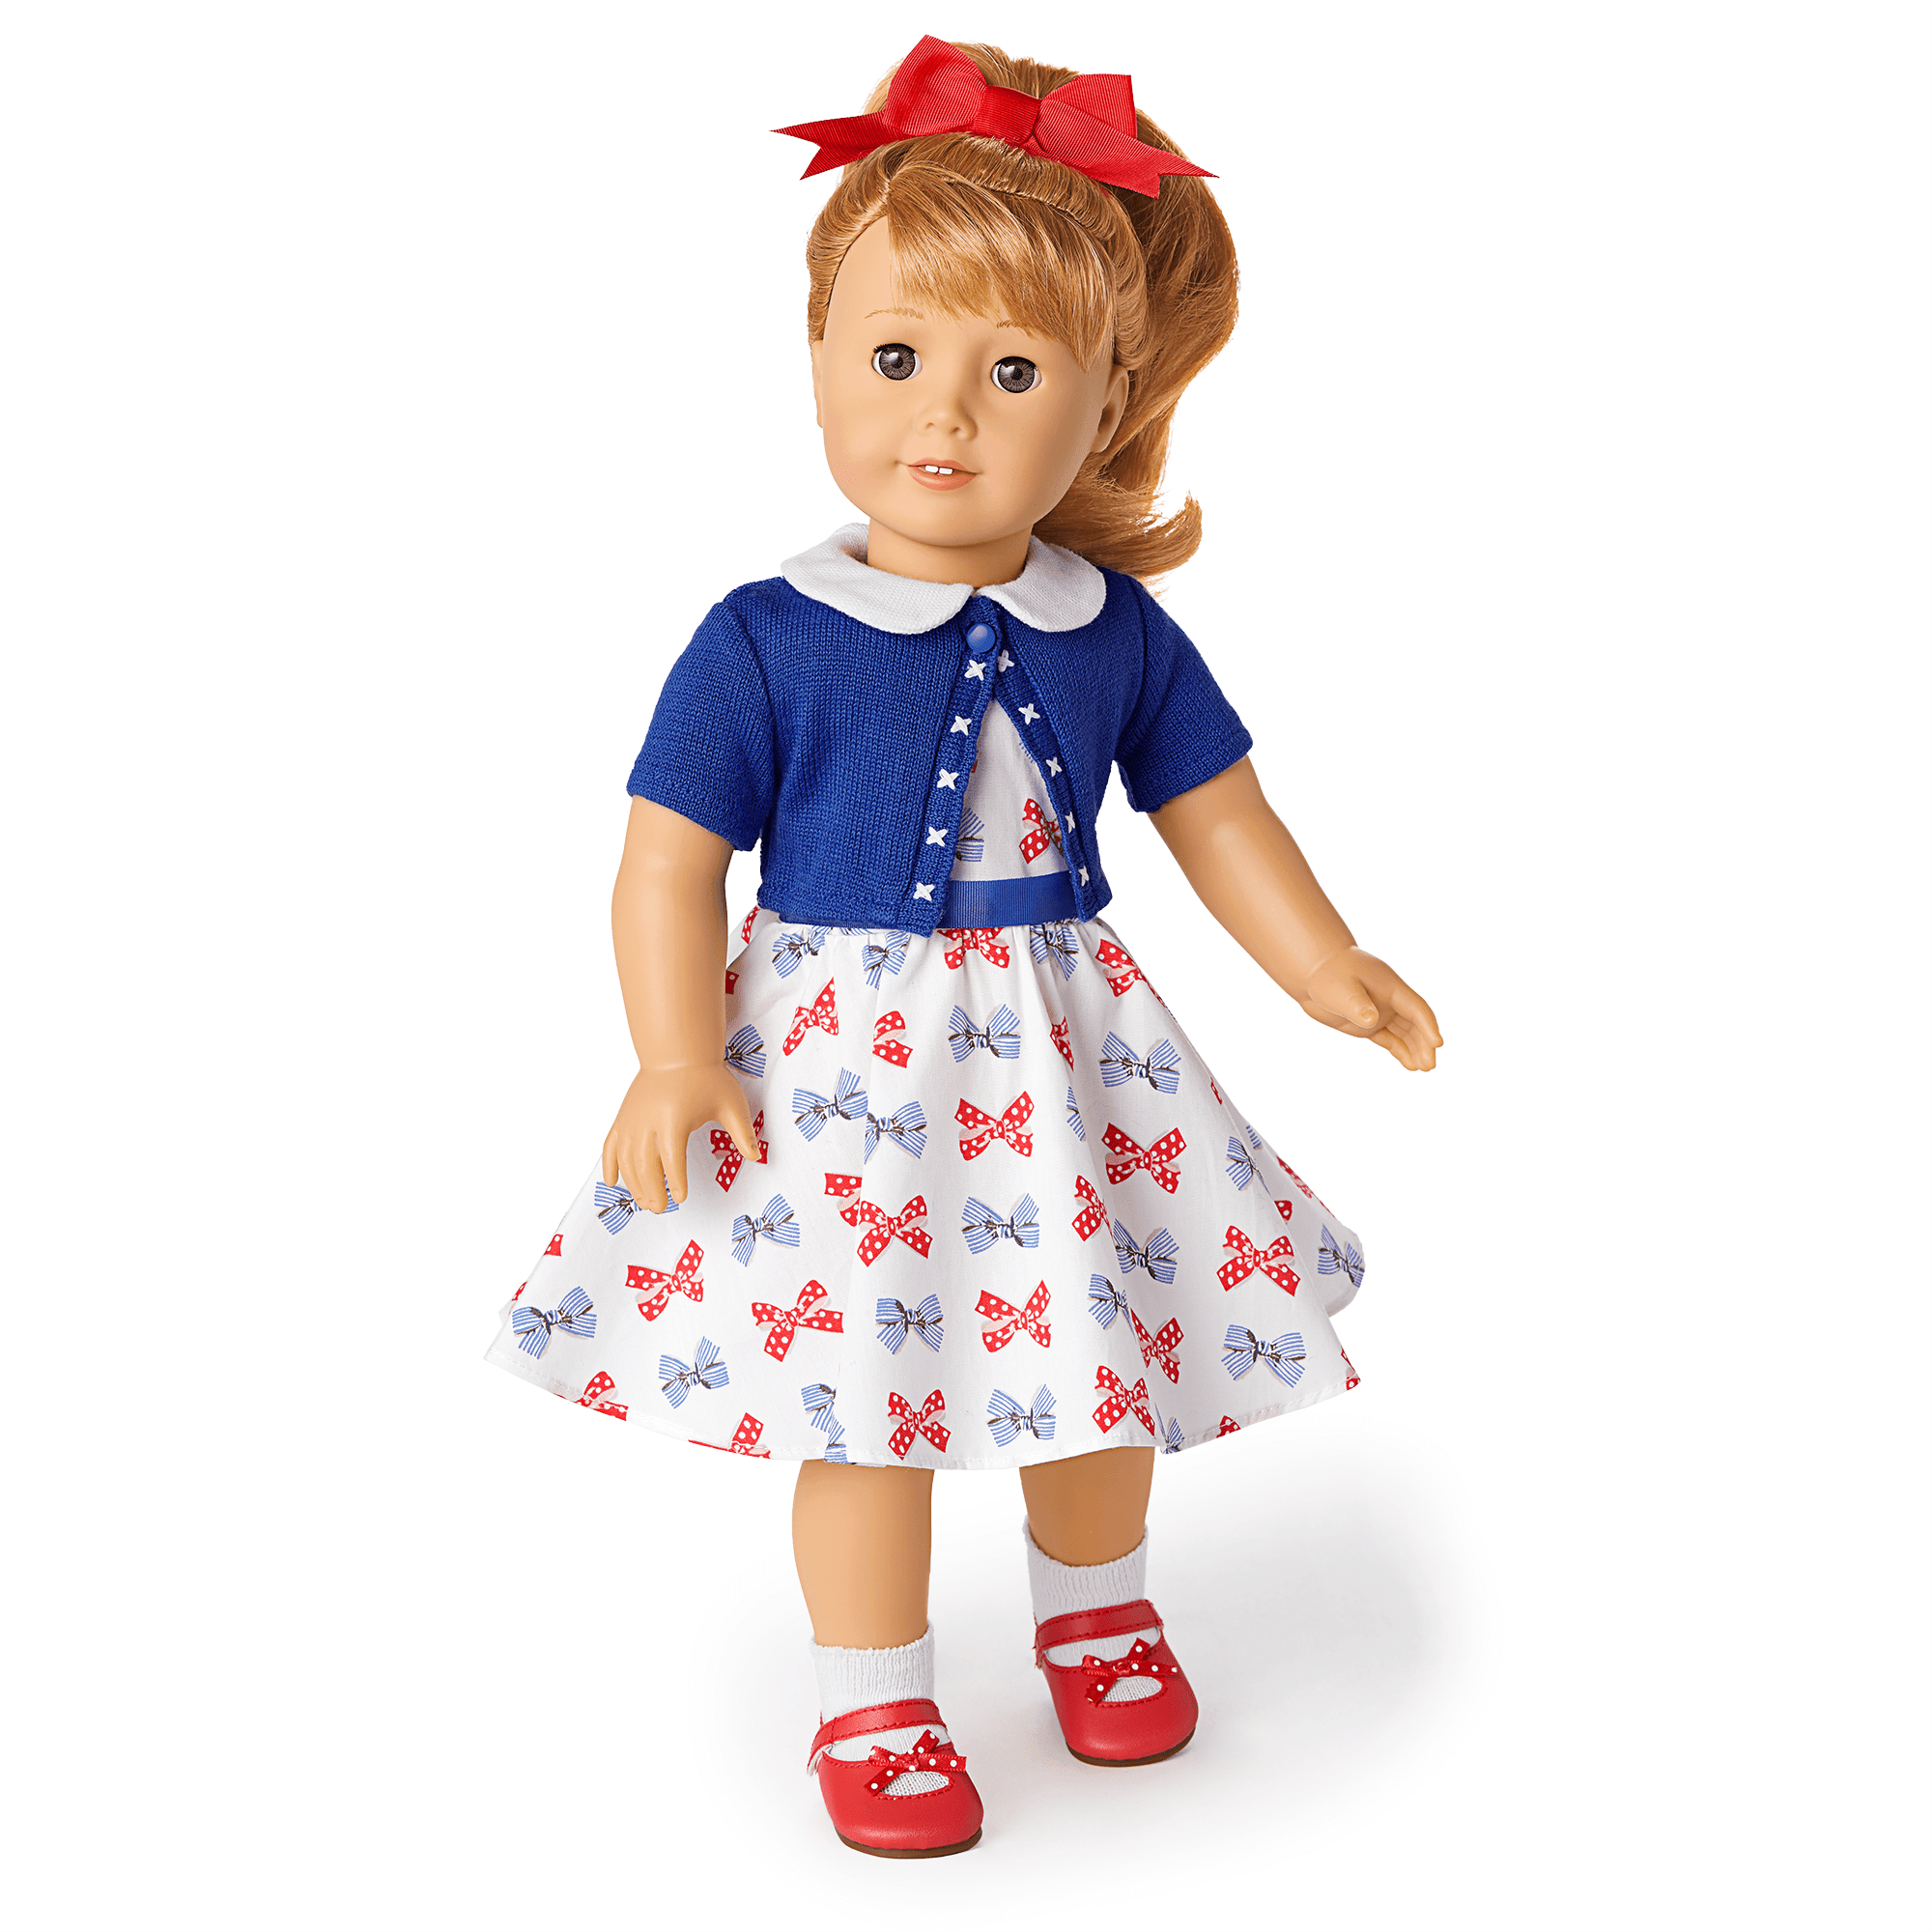 Prep in Your Step, 18 Doll School Outfit